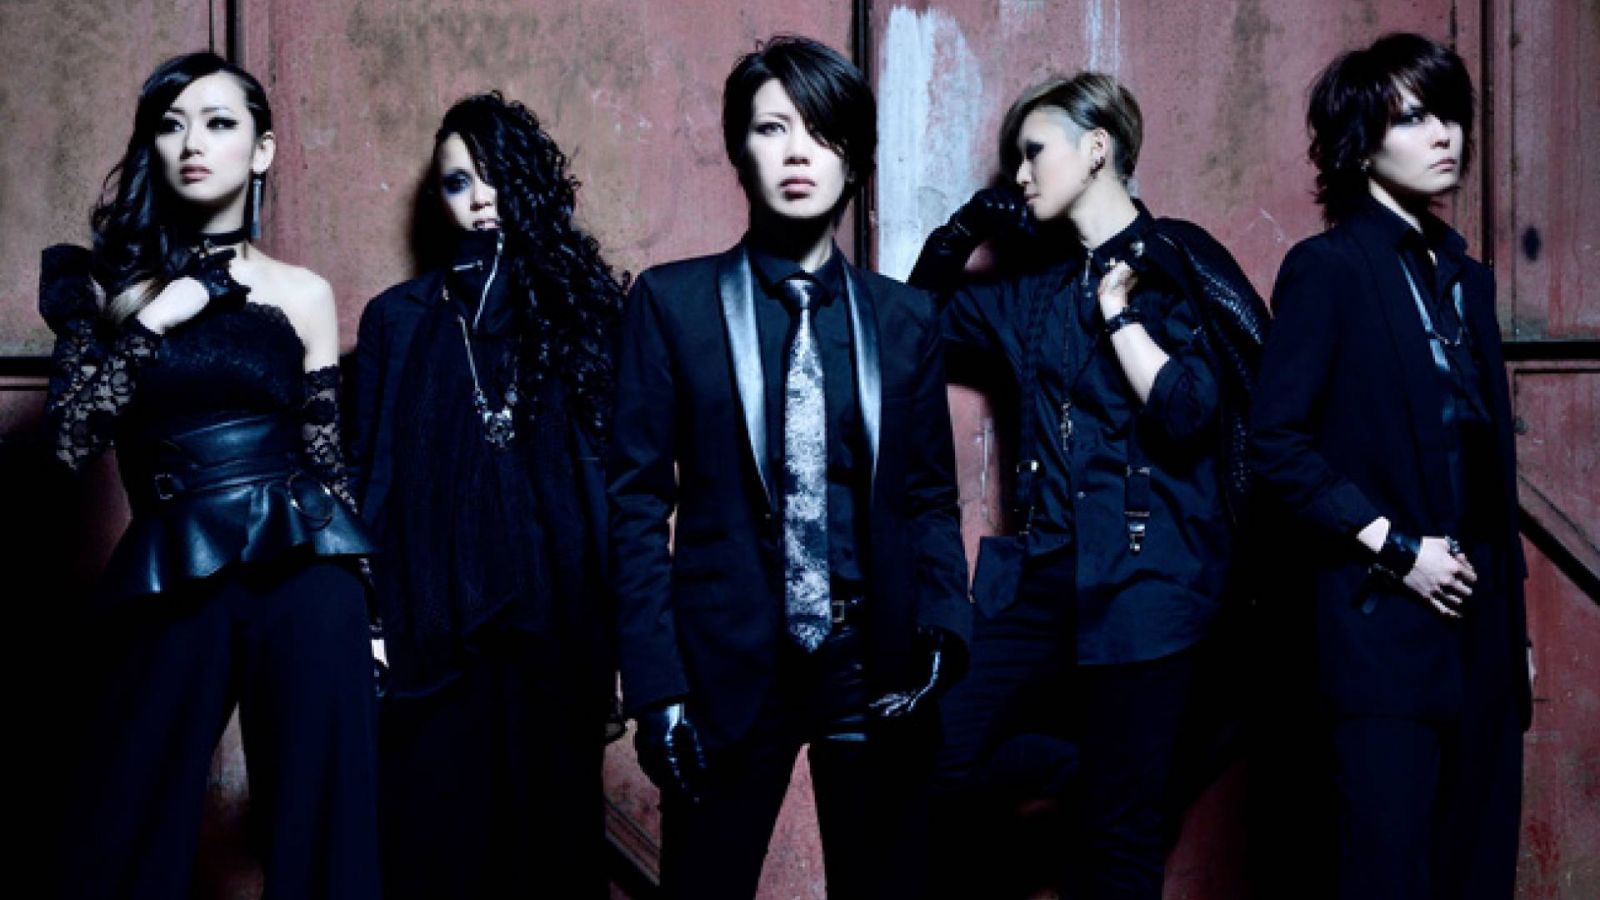 exist†trace lanza su cuenta en Instagram © Monster's inc. All rights reserved.